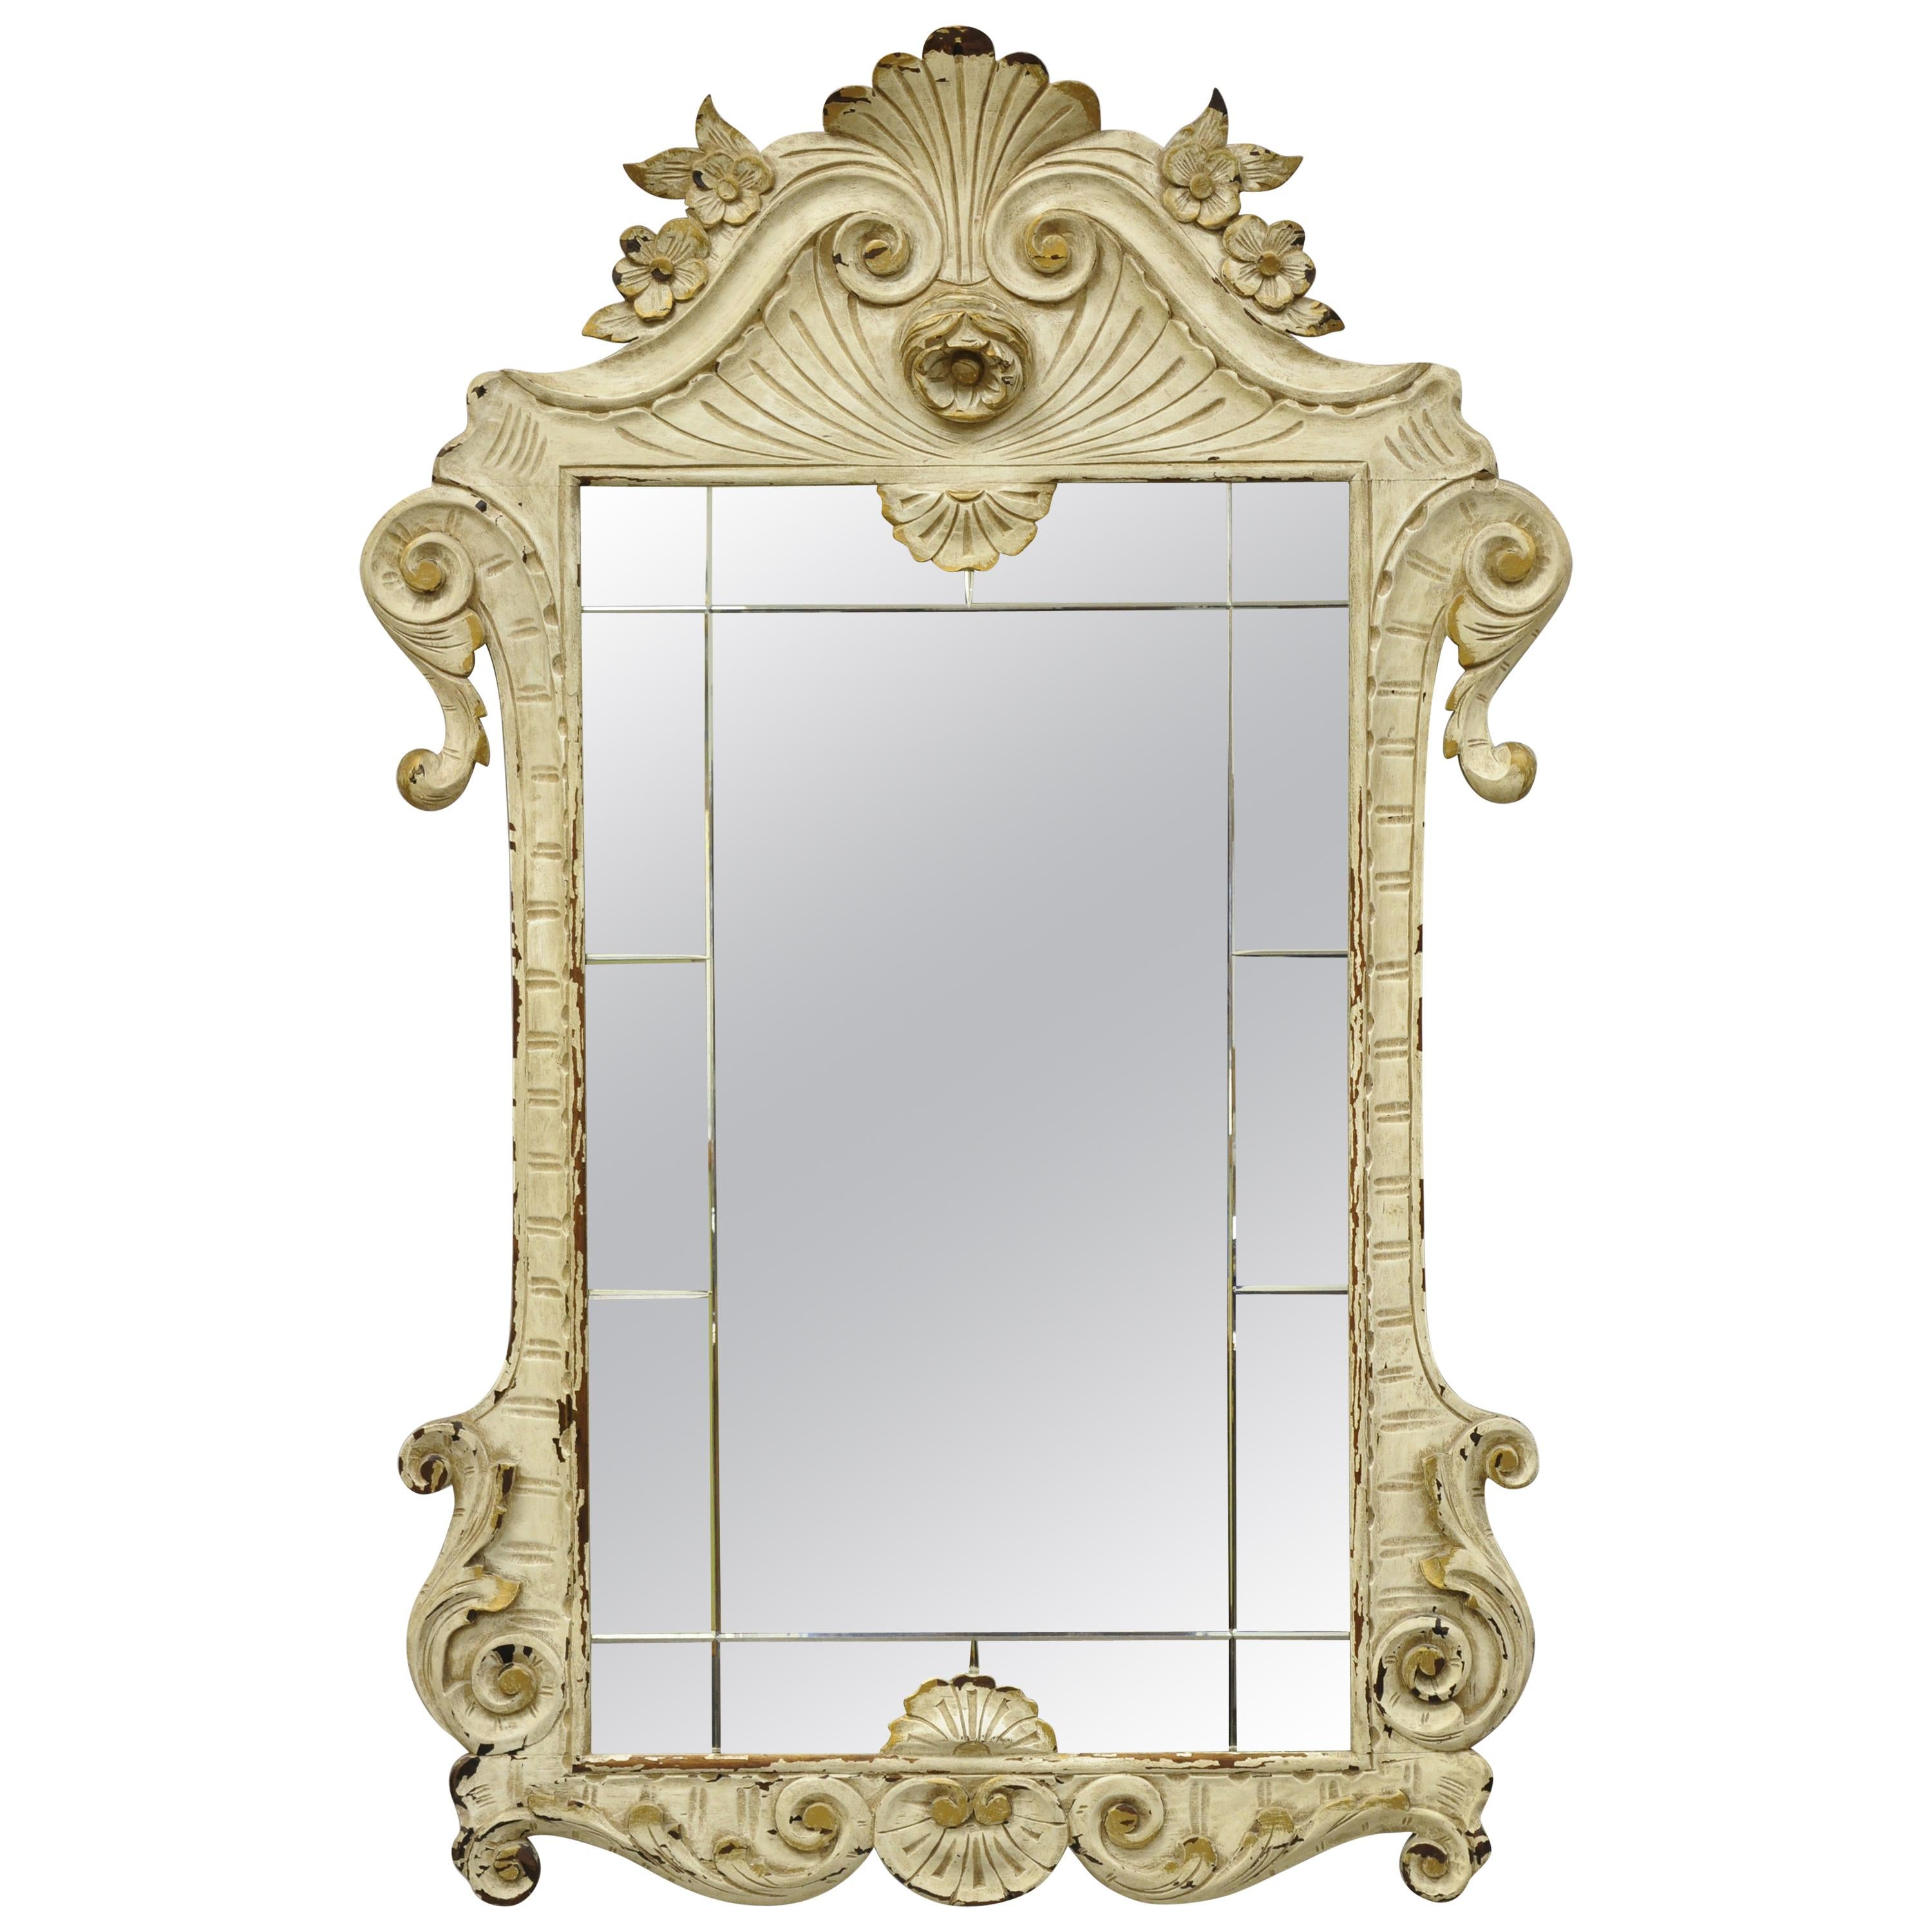 Antique white shabby distress painted chic rose carved Victorian wall mirror. Item features an etched mirror, rose and shell carved solid wood frame, distressed white finish, very nice antique item, great style and form, circa early 1900s.